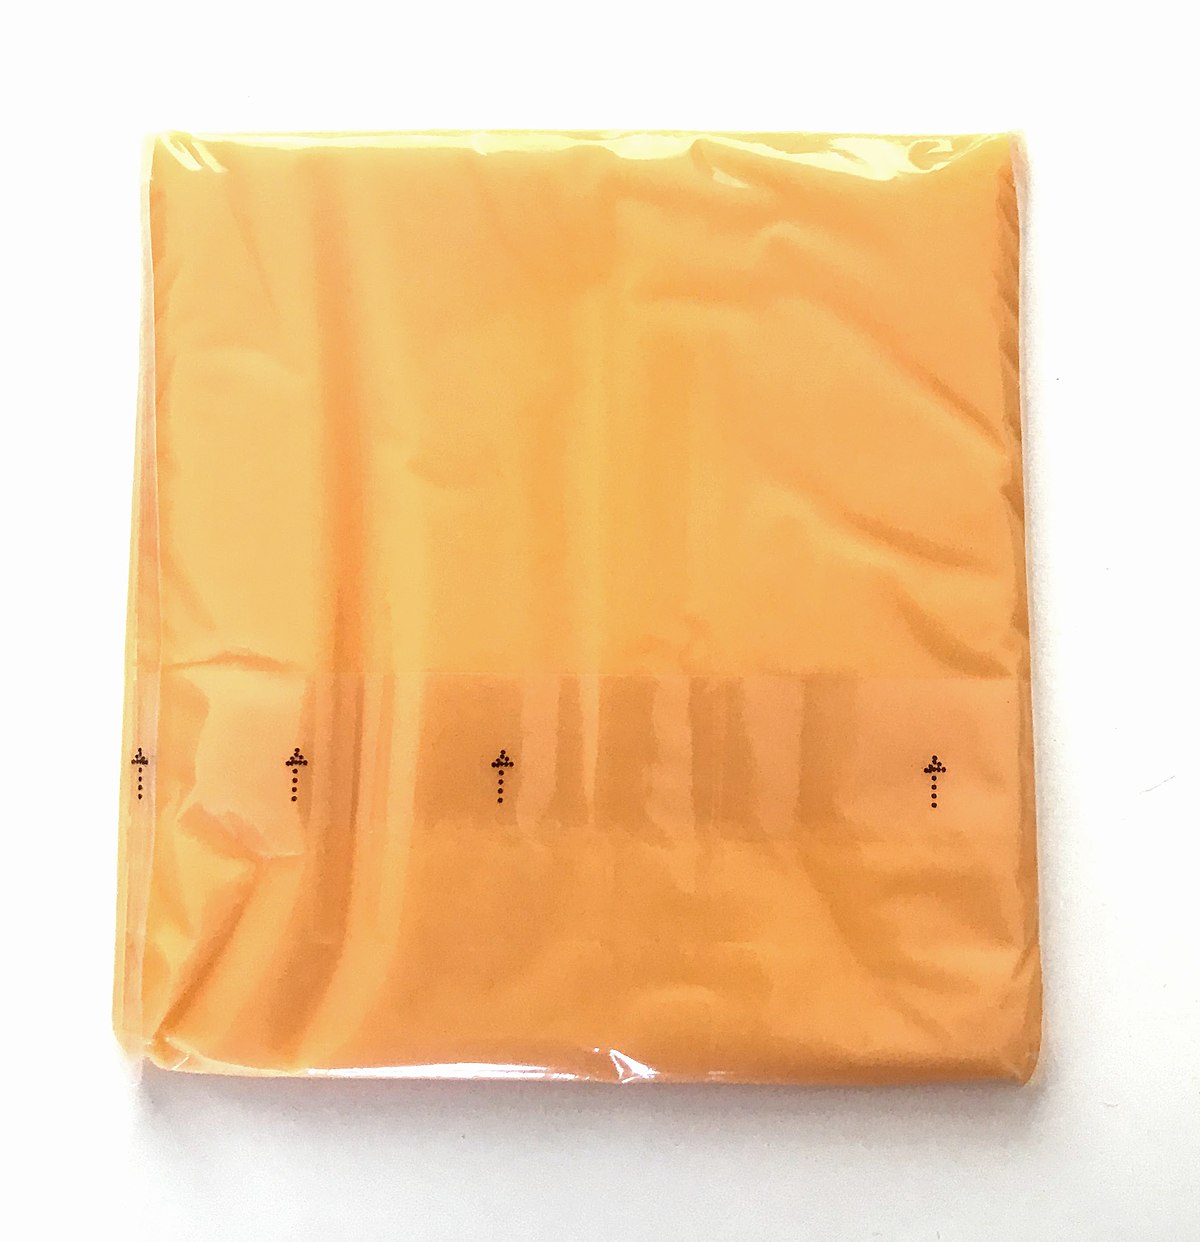 https://upload.wikimedia.org/wikipedia/commons/thumb/1/1c/Single_wrapped_slice_of_processed_cheese.jpg/1200px-Single_wrapped_slice_of_processed_cheese.jpg